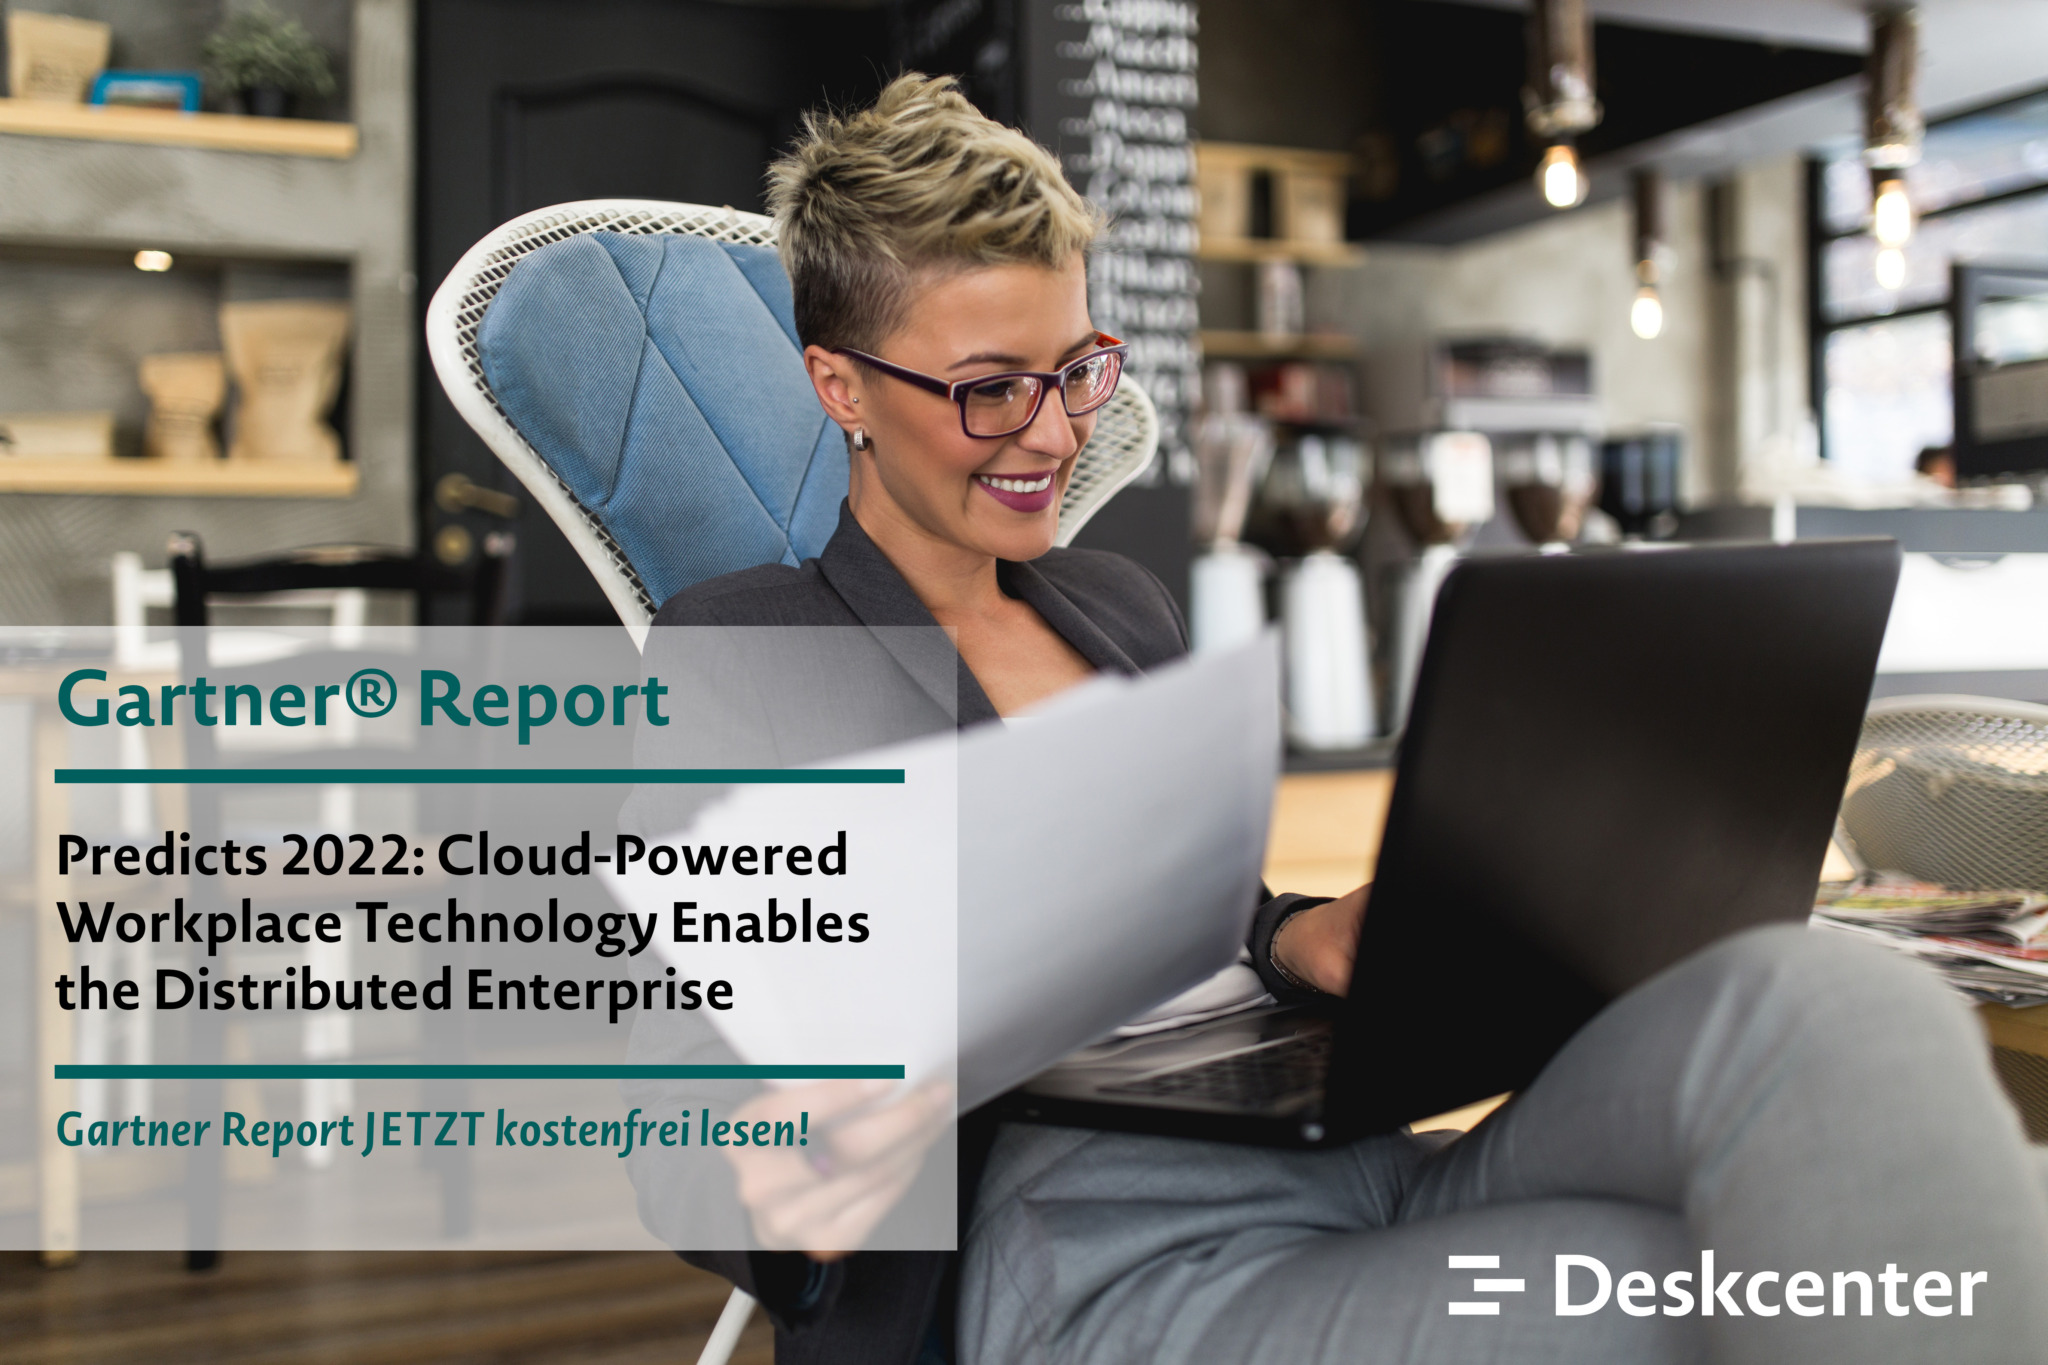 Cloud-Powered Workplace Technology enables the Distributed Enterprise